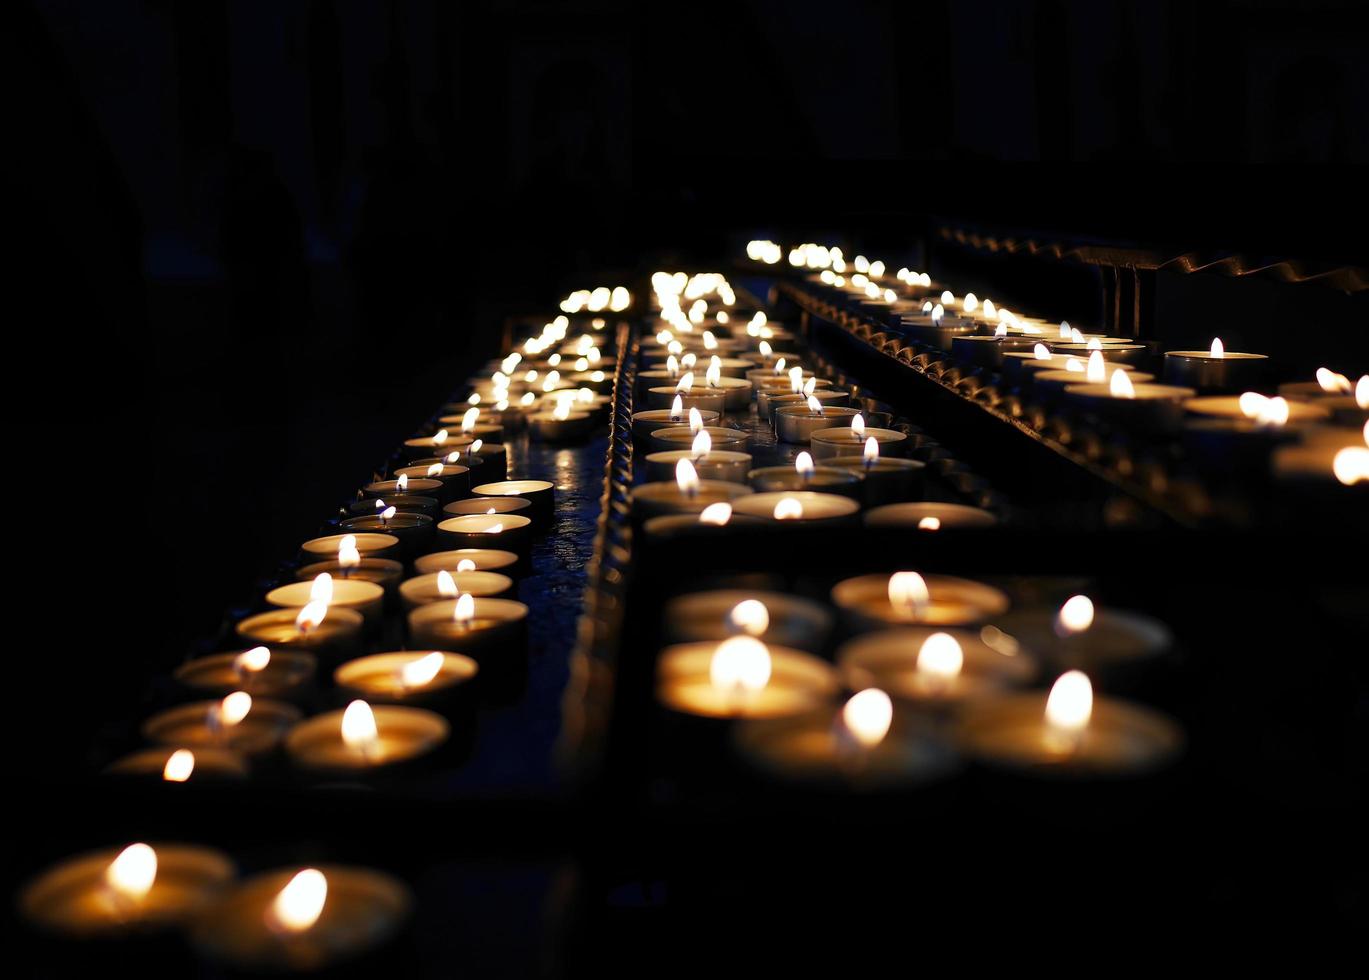 Rows of small candle lights in the dark background religion church photo